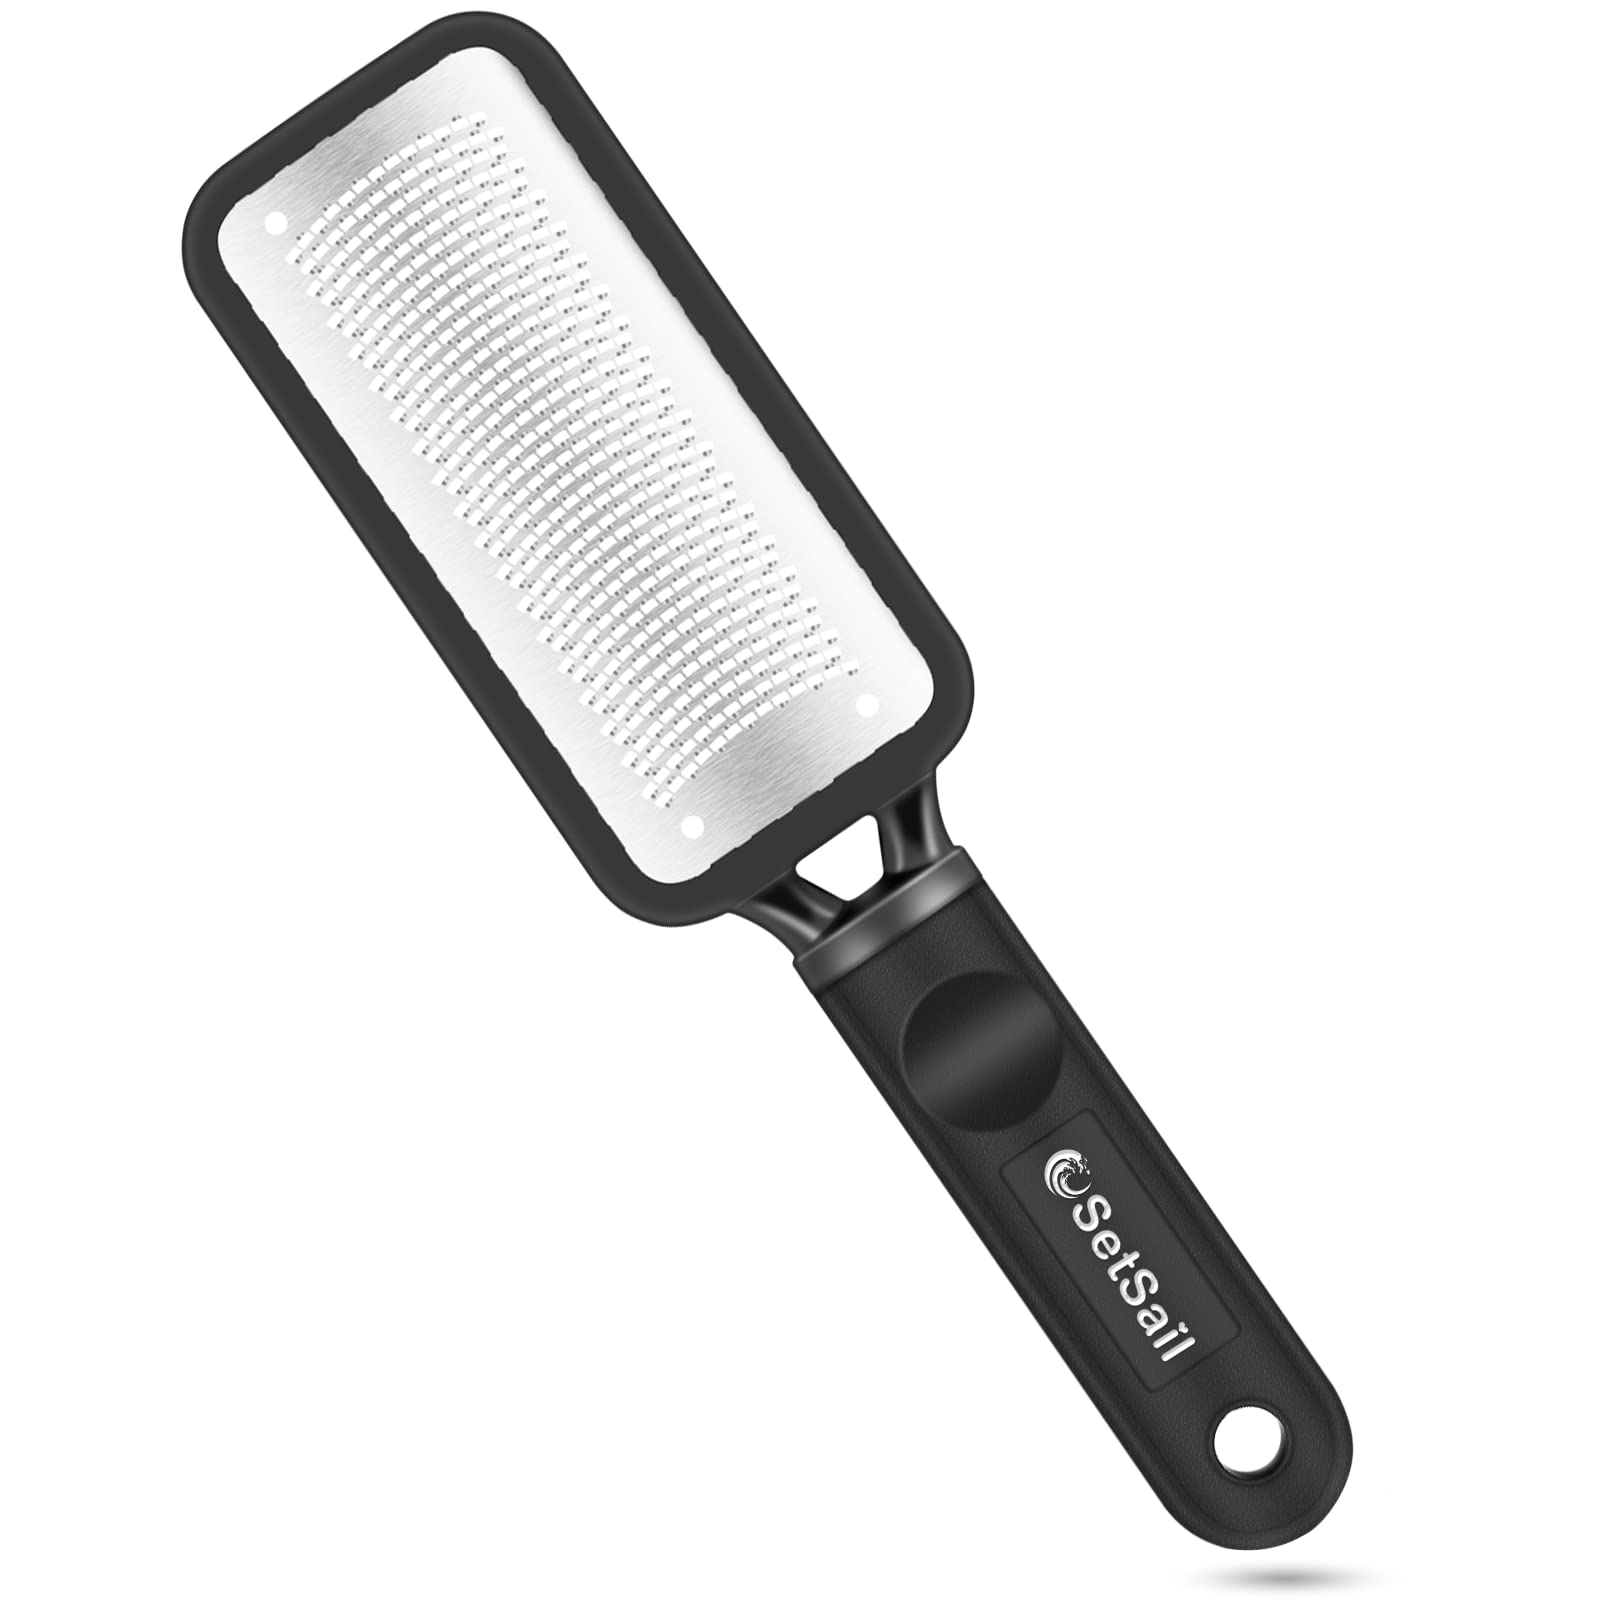 Professional Foot File Lightweight & Strong Stainless Steel - Only Footcare